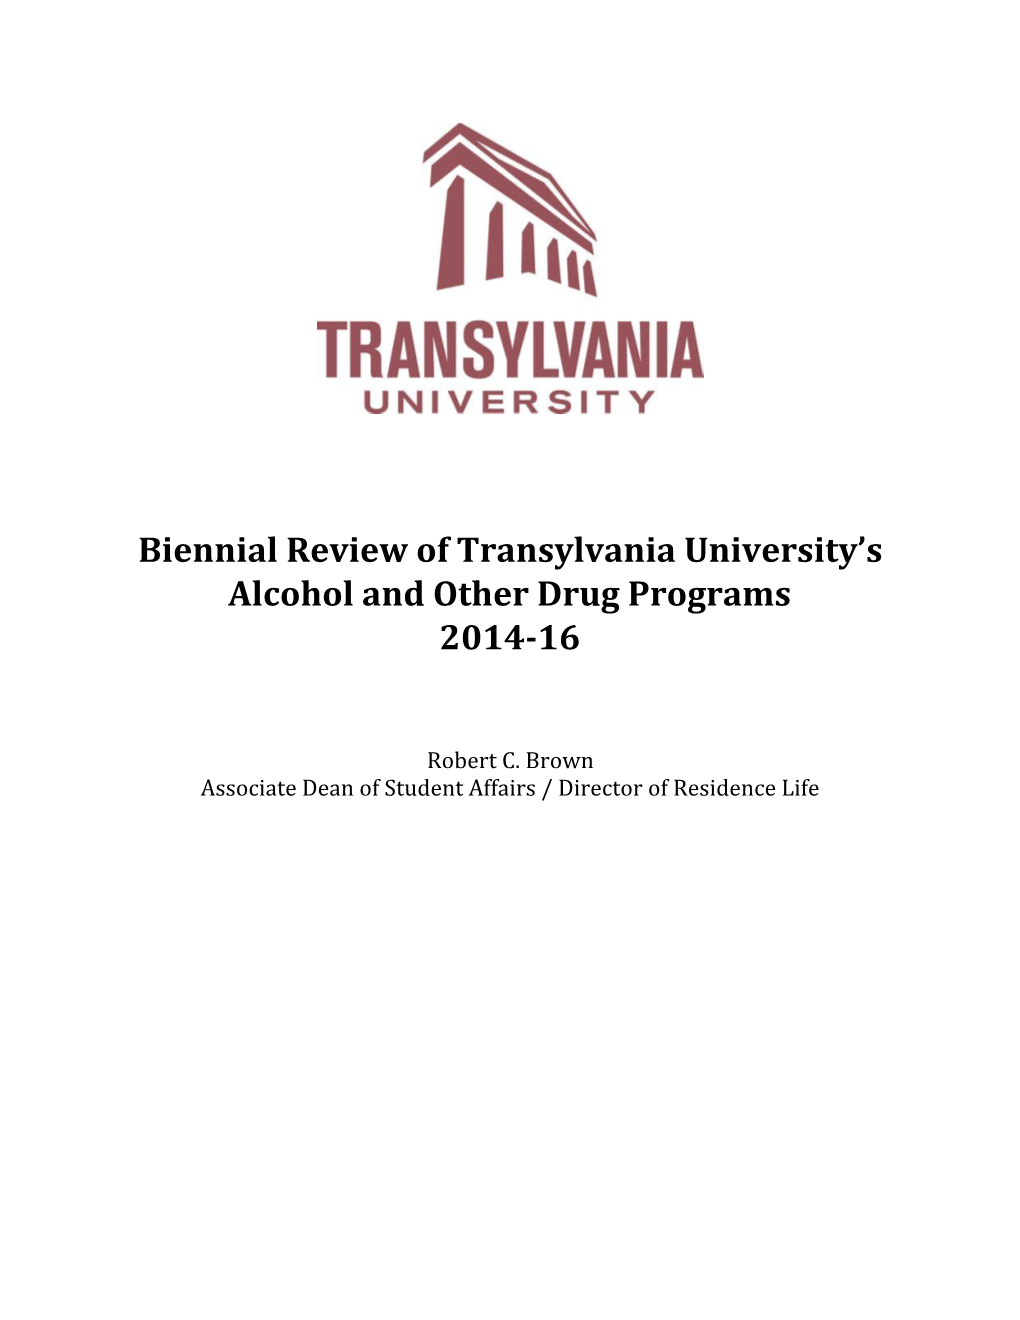 Biennial Review of Transylvania University's Alcohol and Other Drug